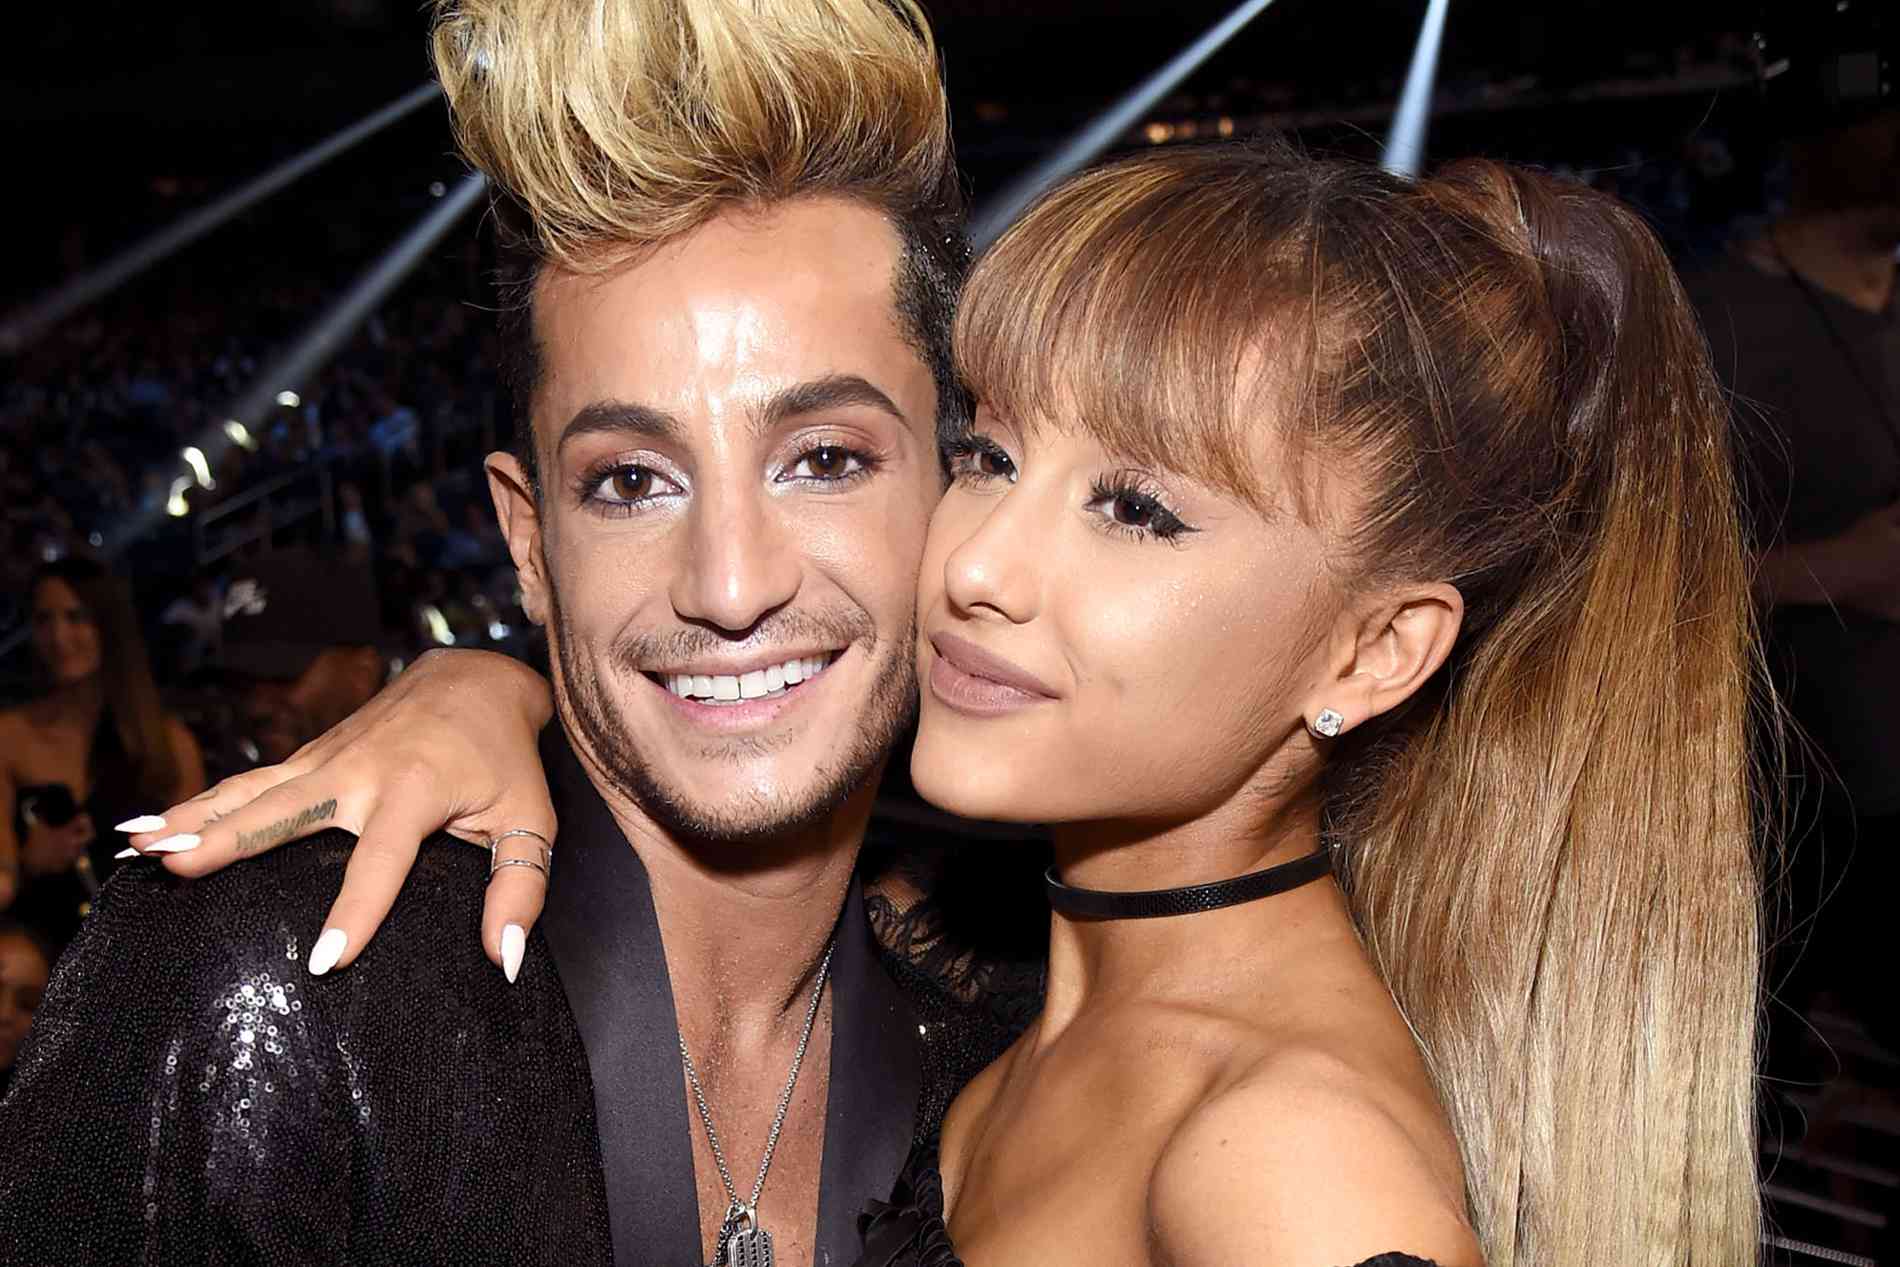 Frankie J. Grande and Ariana Grande pose during the 2016 MTV Video Music Awards at Madison Square Garden on August 28, 2016 in New York City.